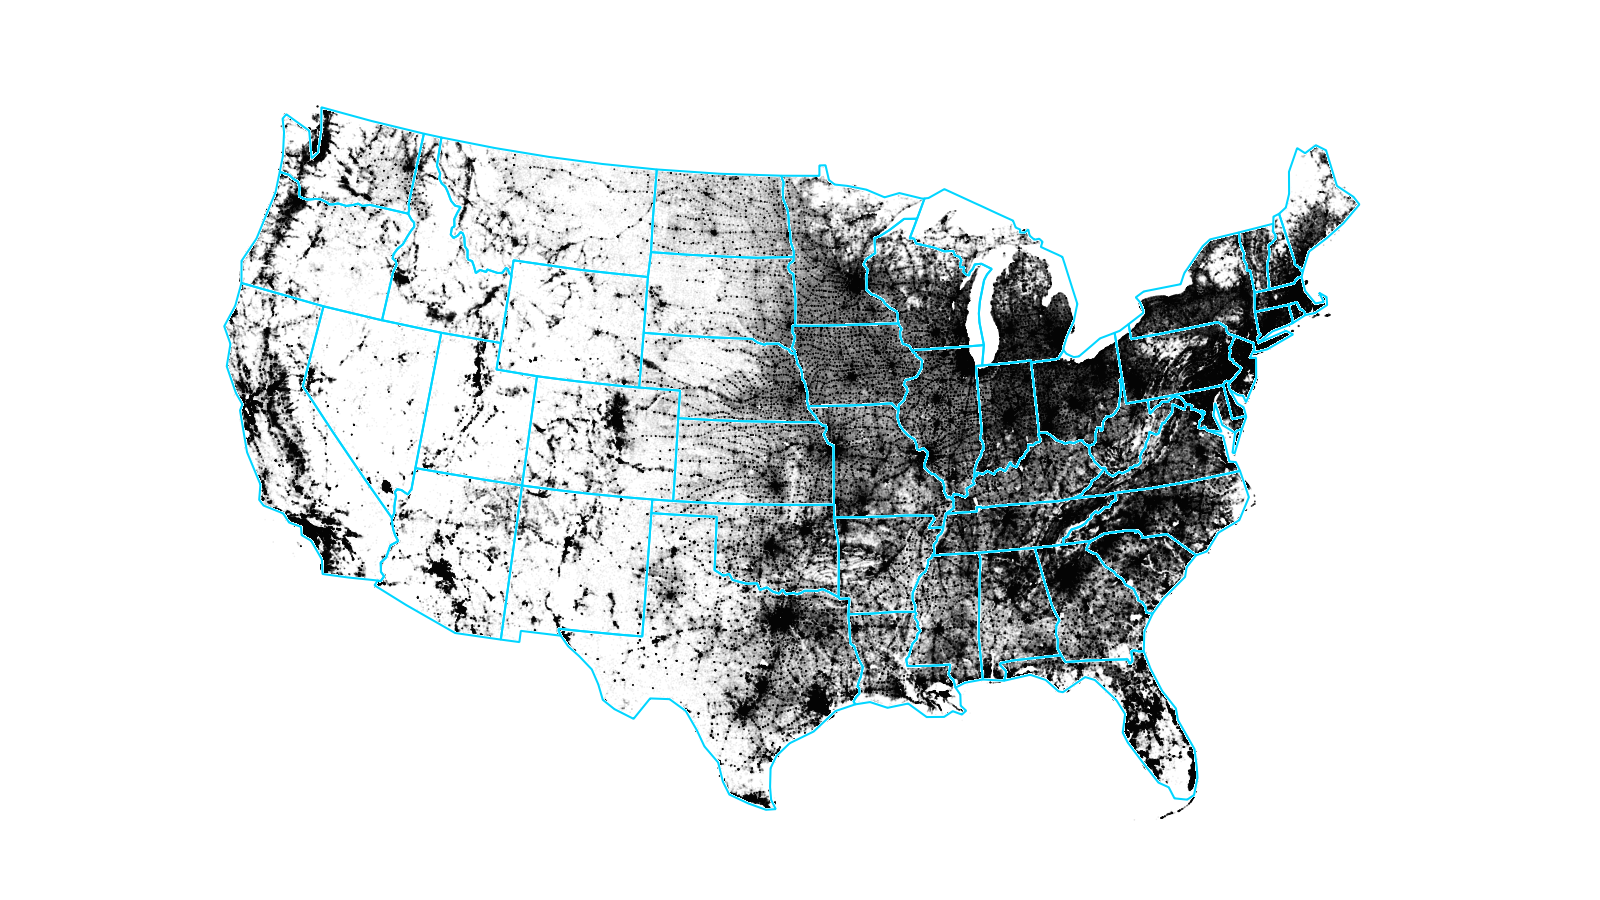 geographic population distribution in the United States